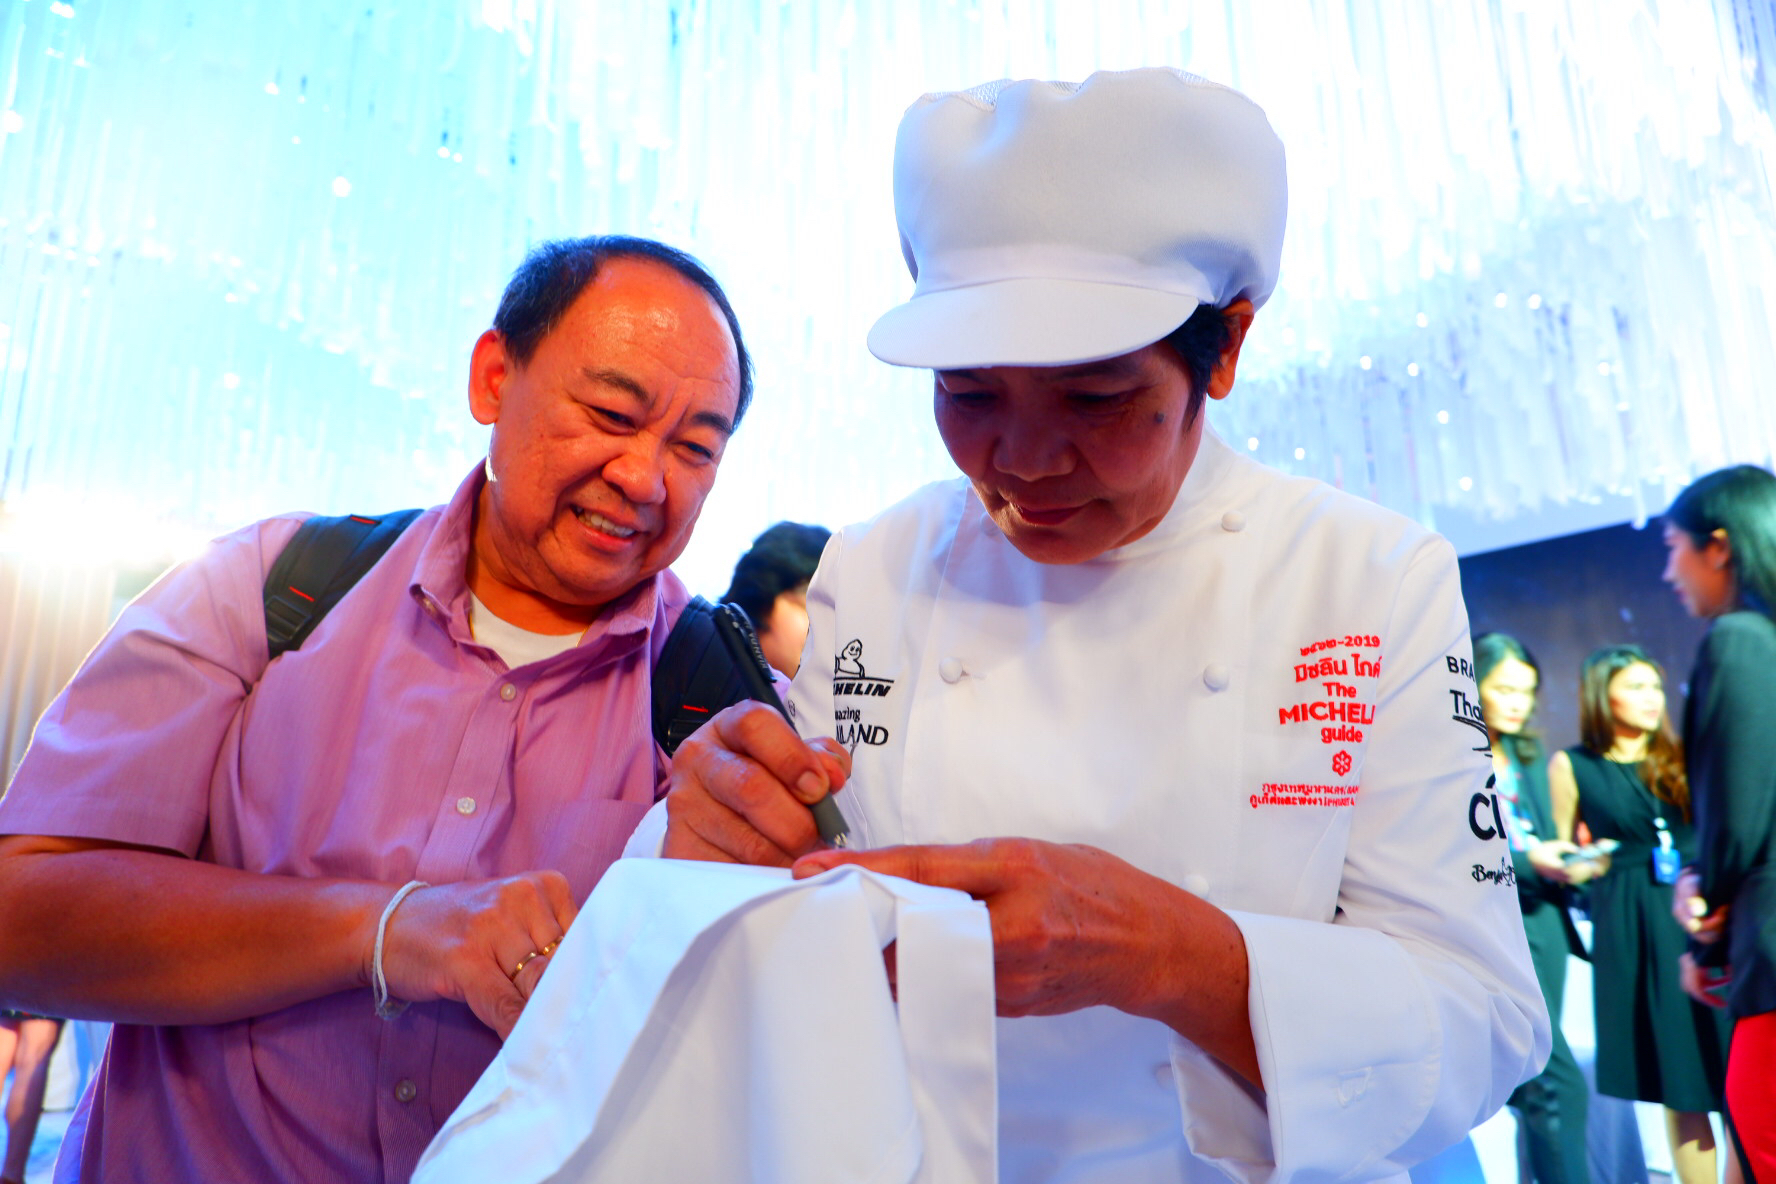 Banyen signs a chef’s jacket for a fan. 